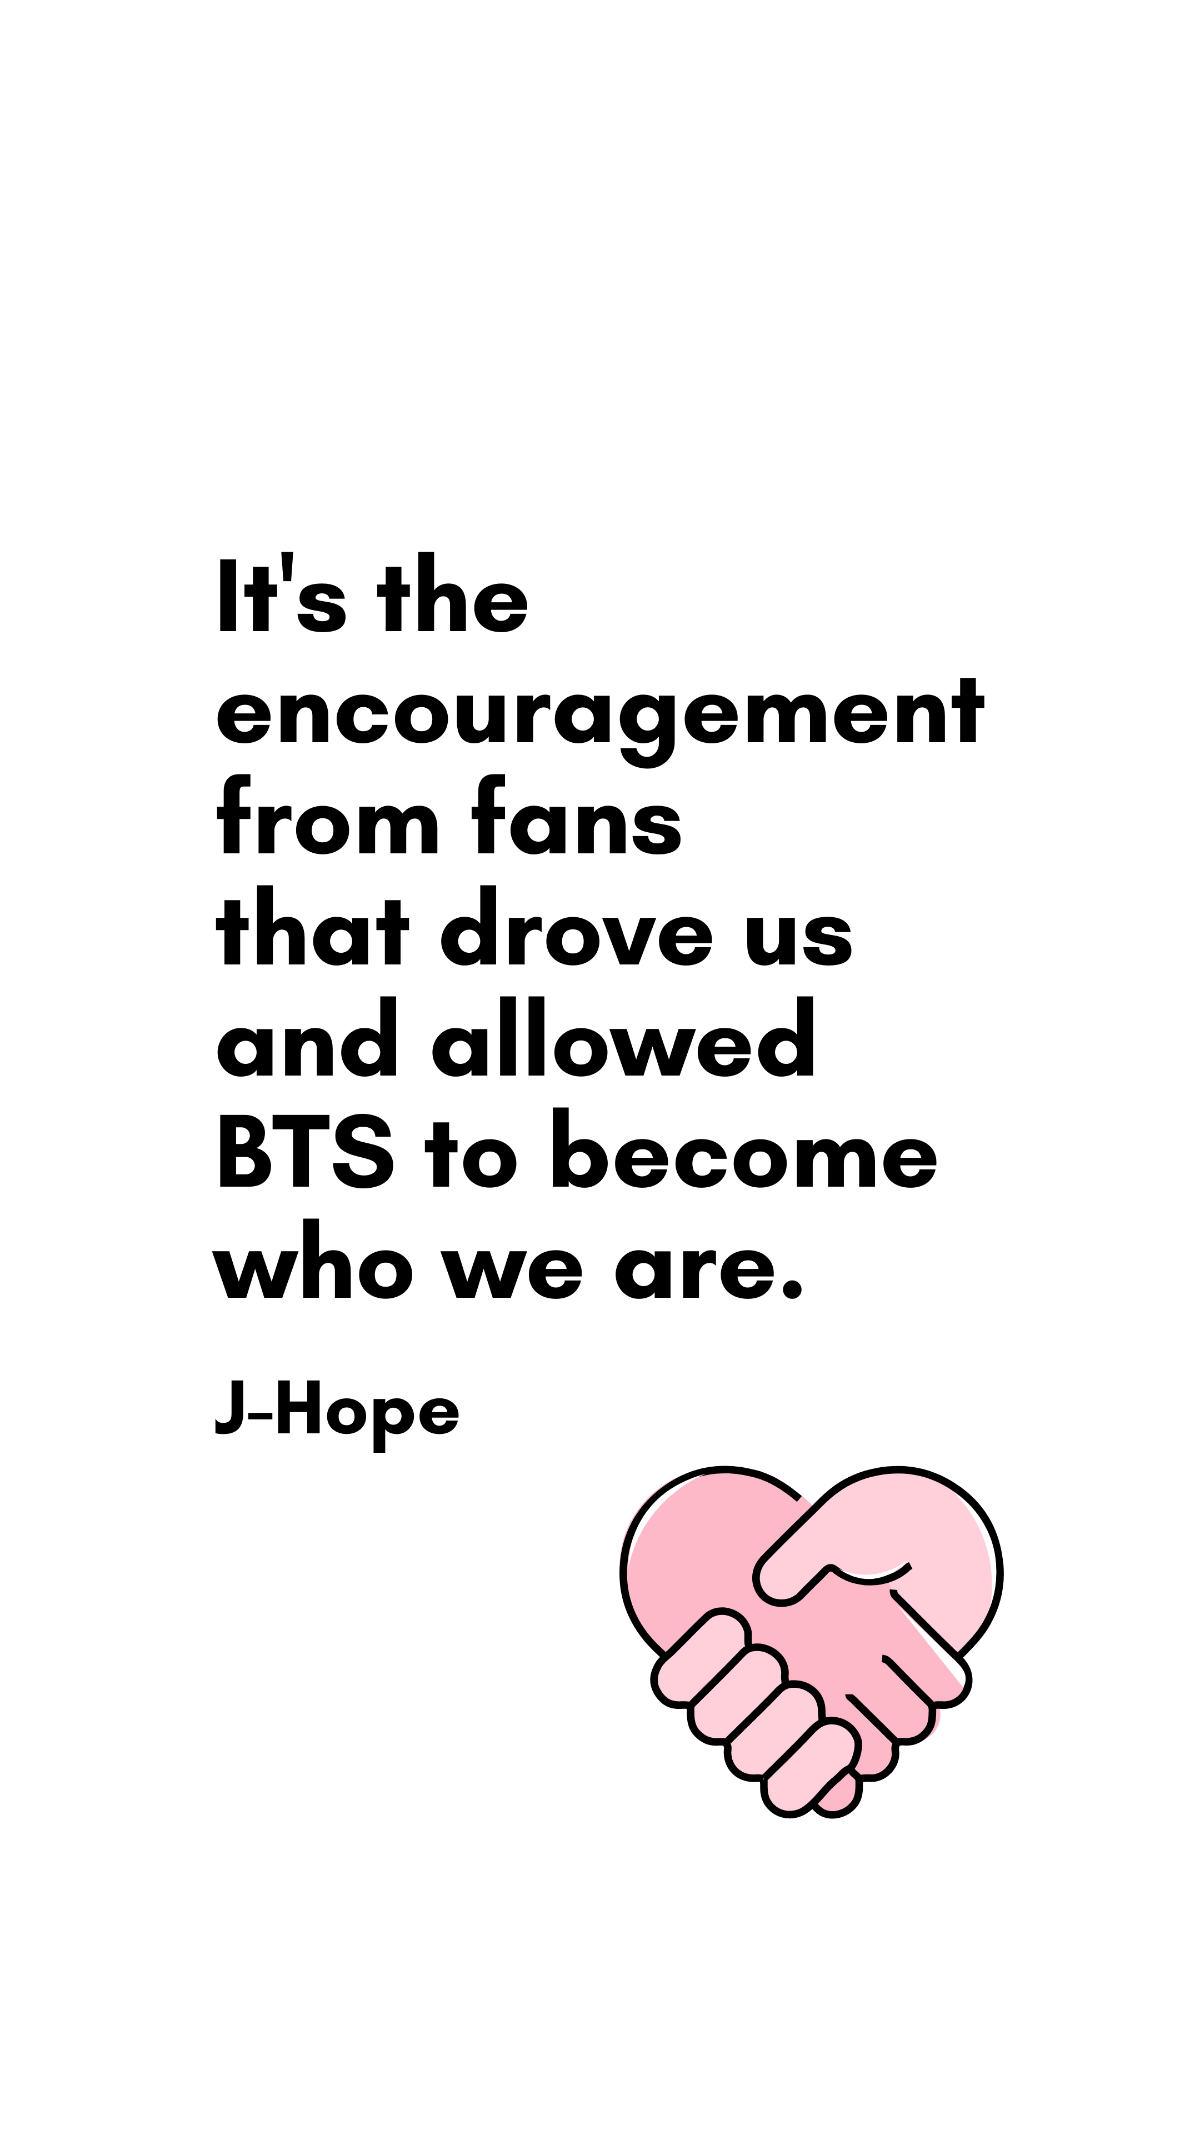 J-Hope - It's the encouragement from fans that drove us and allowed BTS to become who we are. Template